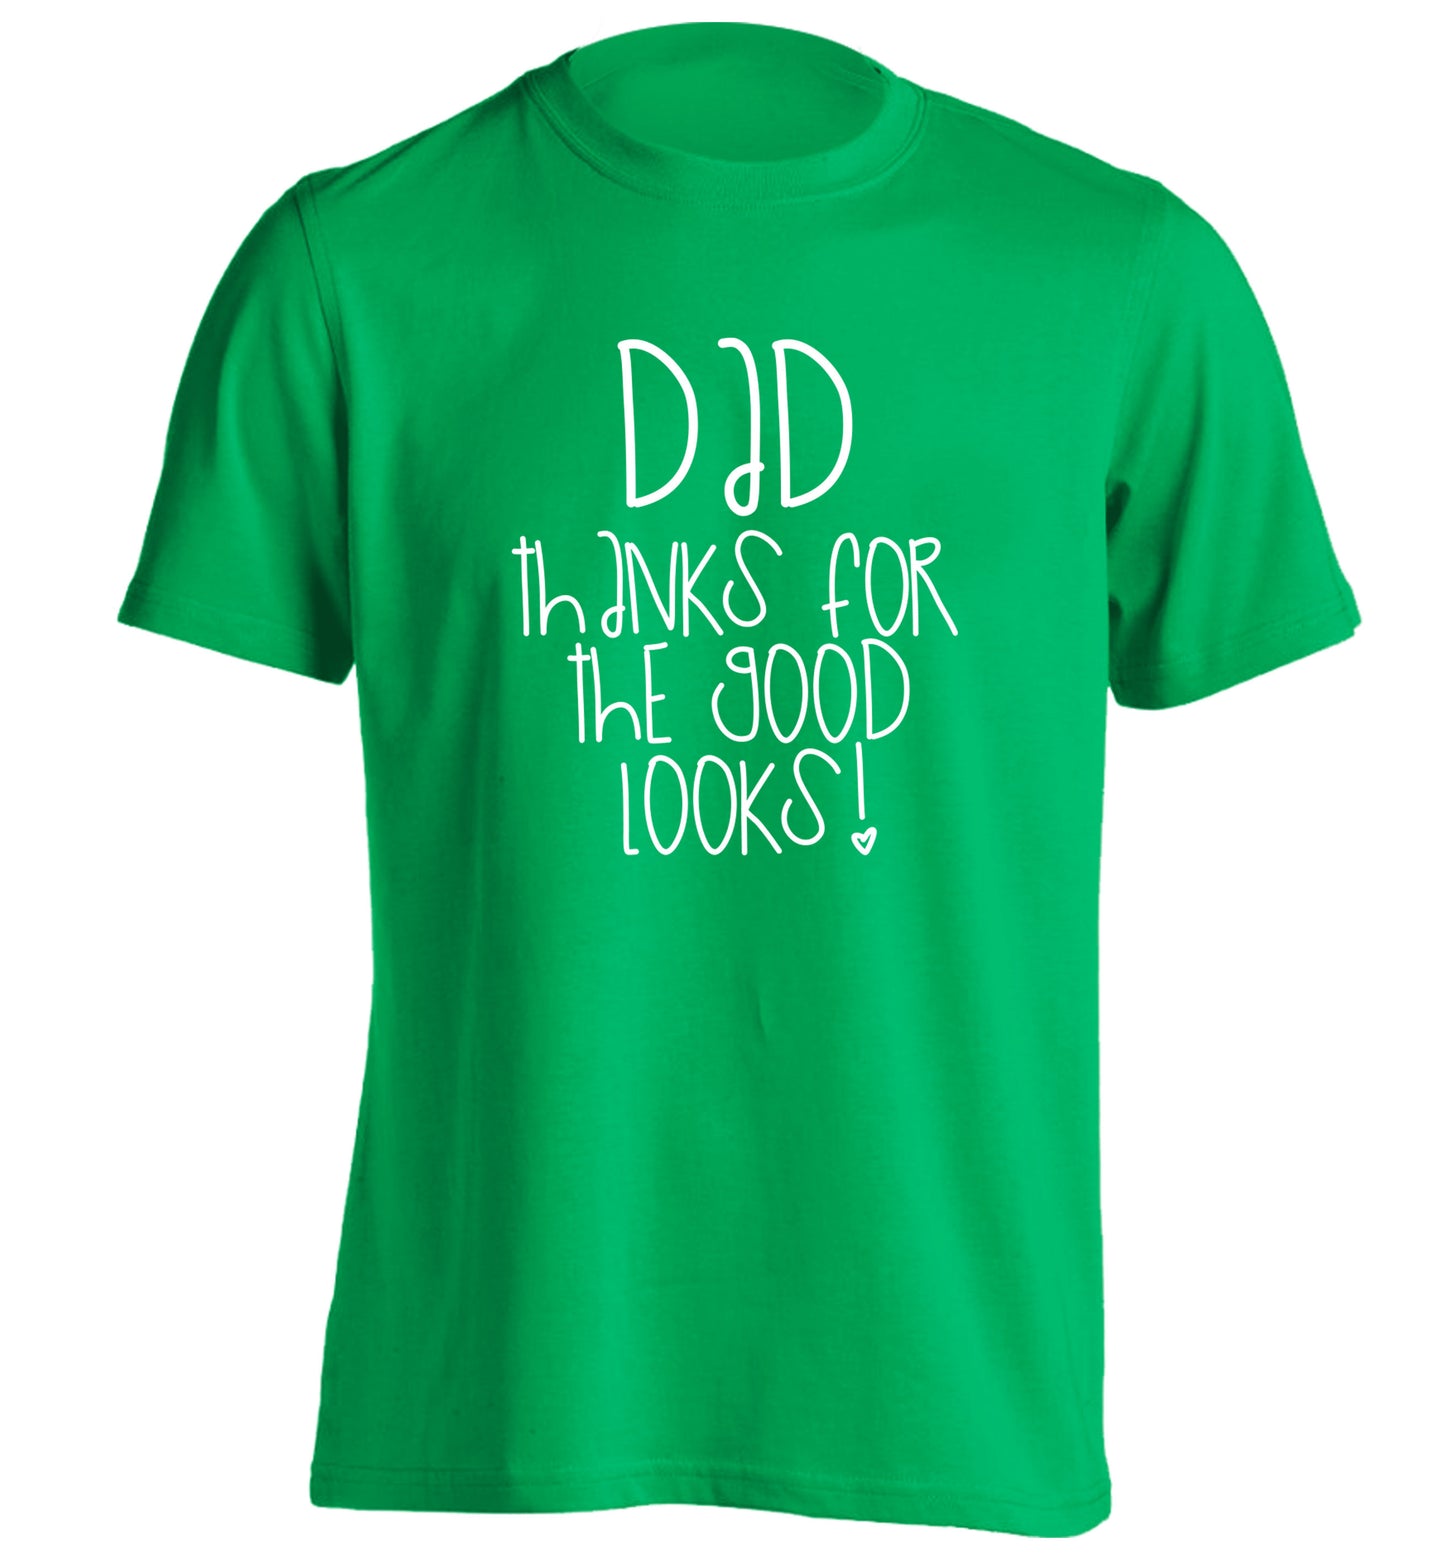 Dad thanks for the good looks adults unisex green Tshirt 2XL